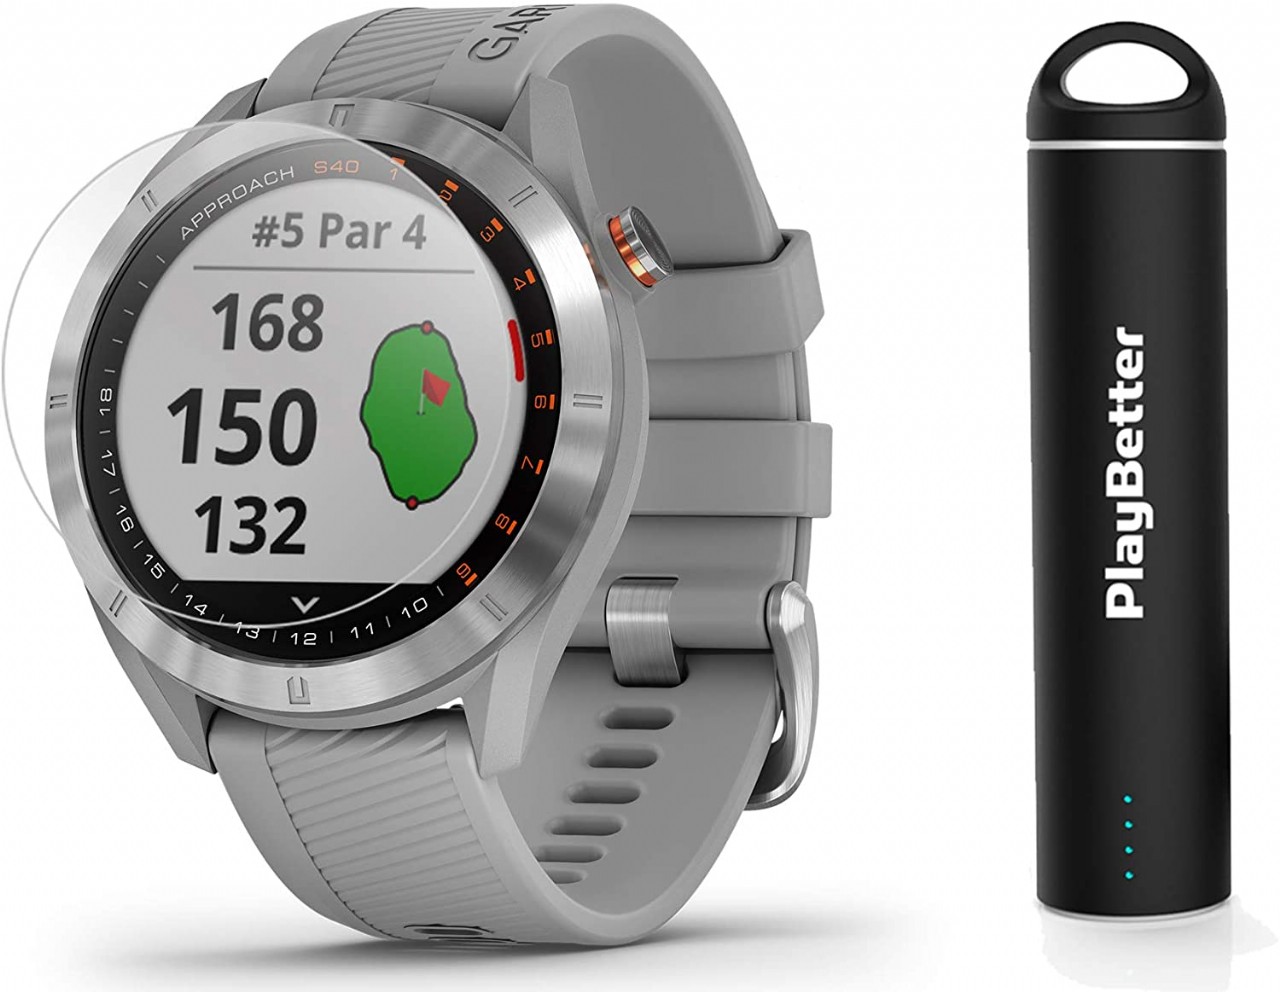 Garmin Approach S40 (Gray) Golf GPS Smartwatch Bundle | Includes PlayBetter Portable Charger